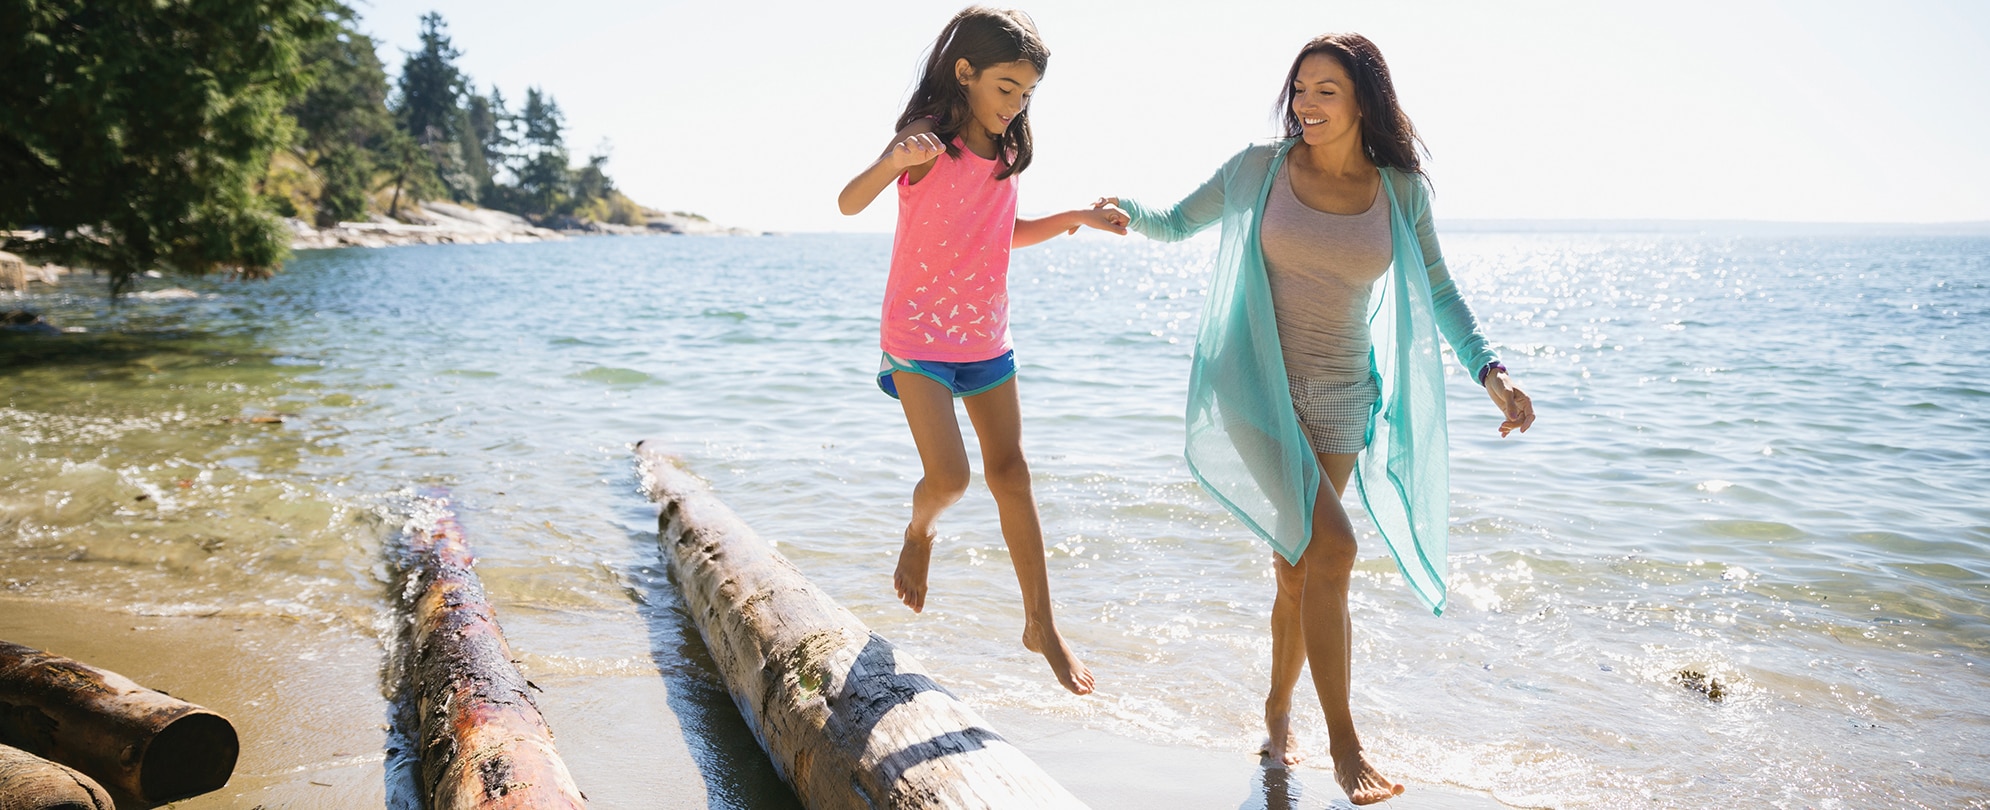 A mom holds her daughter’s hand as they walk on a beach, the daughter jumping off a fallen log by the water.